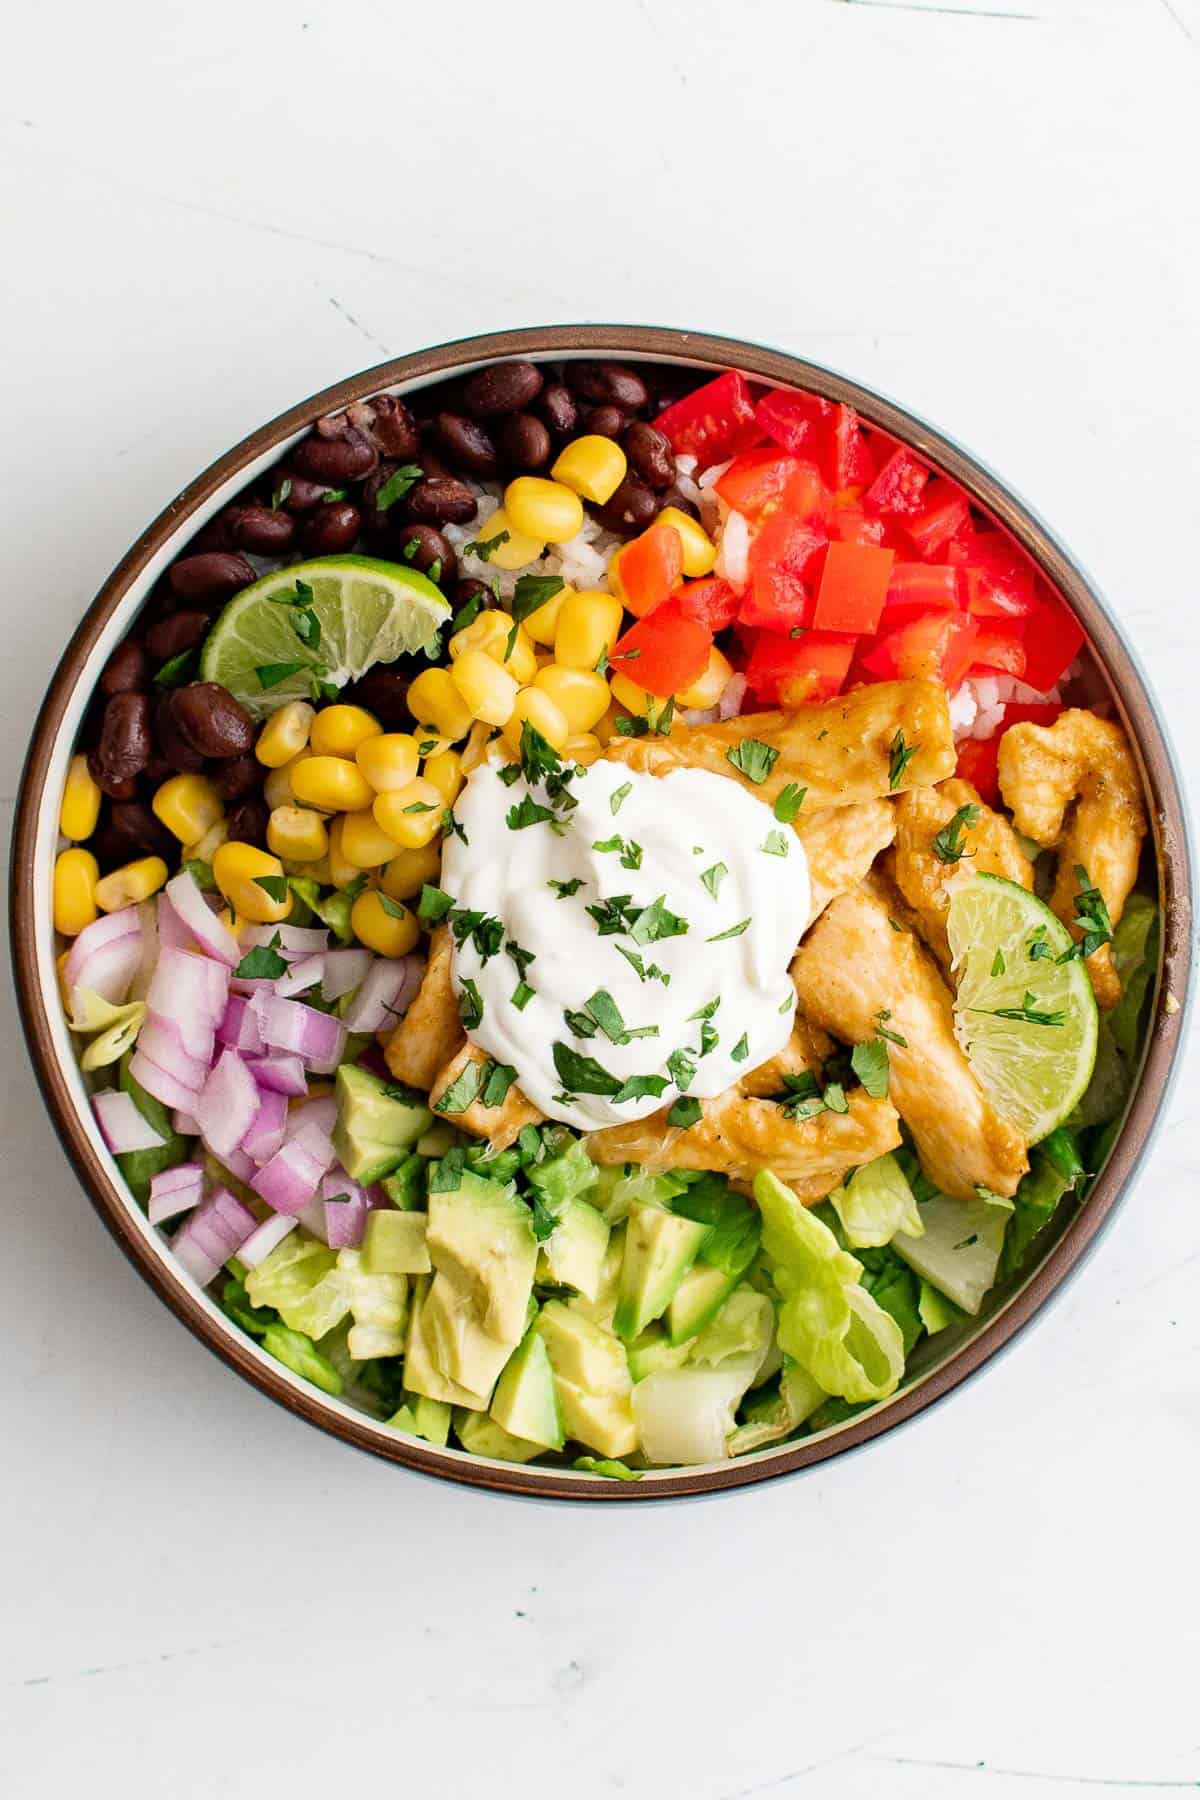 a chicken burrito bowl, filled with chicken, onion, corn, beans, rice, avocado, and sour cream